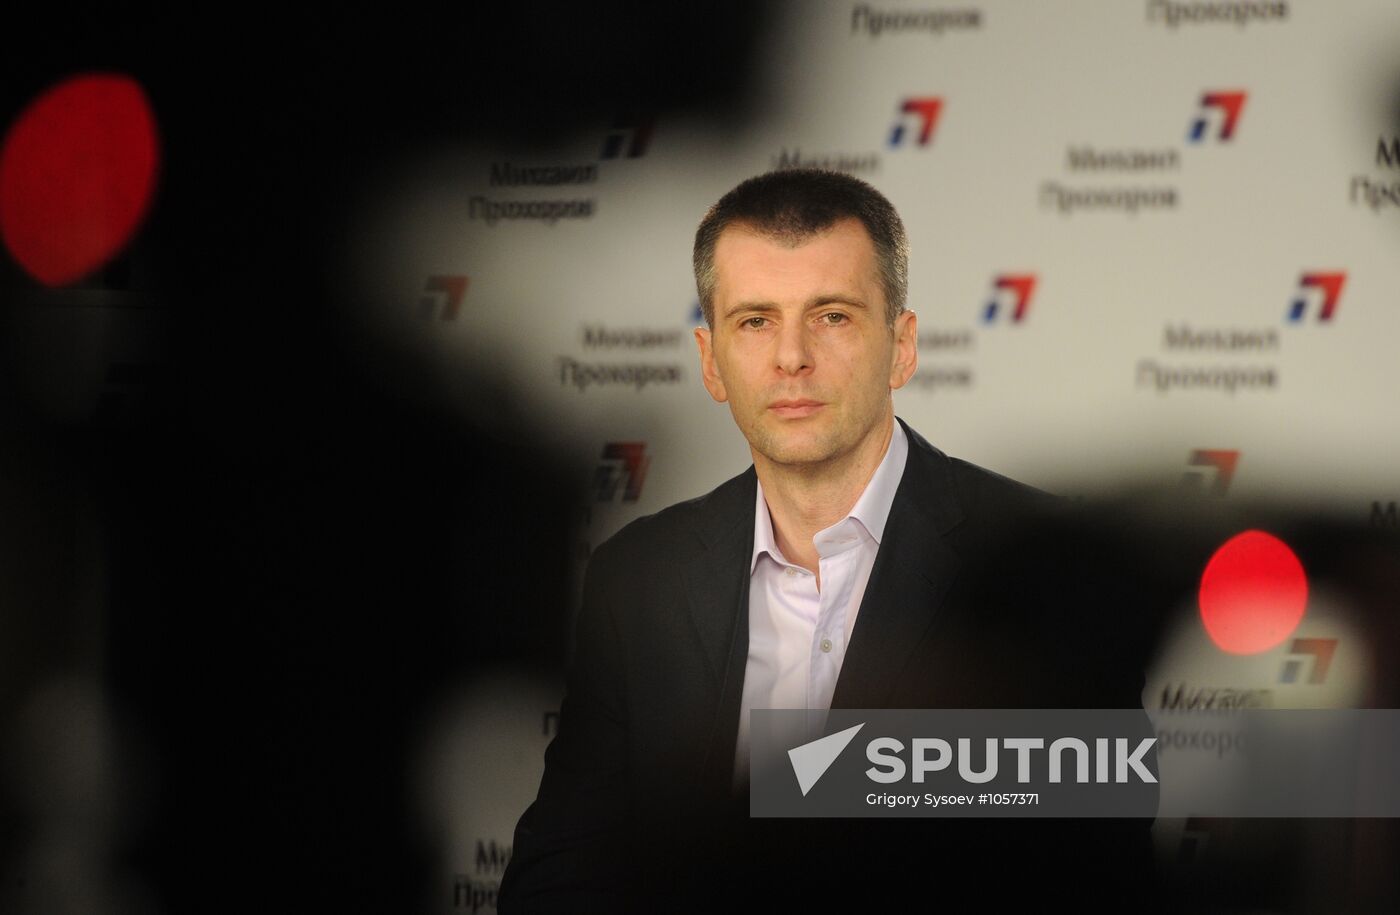 Presidential candidate Mikhail Prokhorov's campaign headquarters